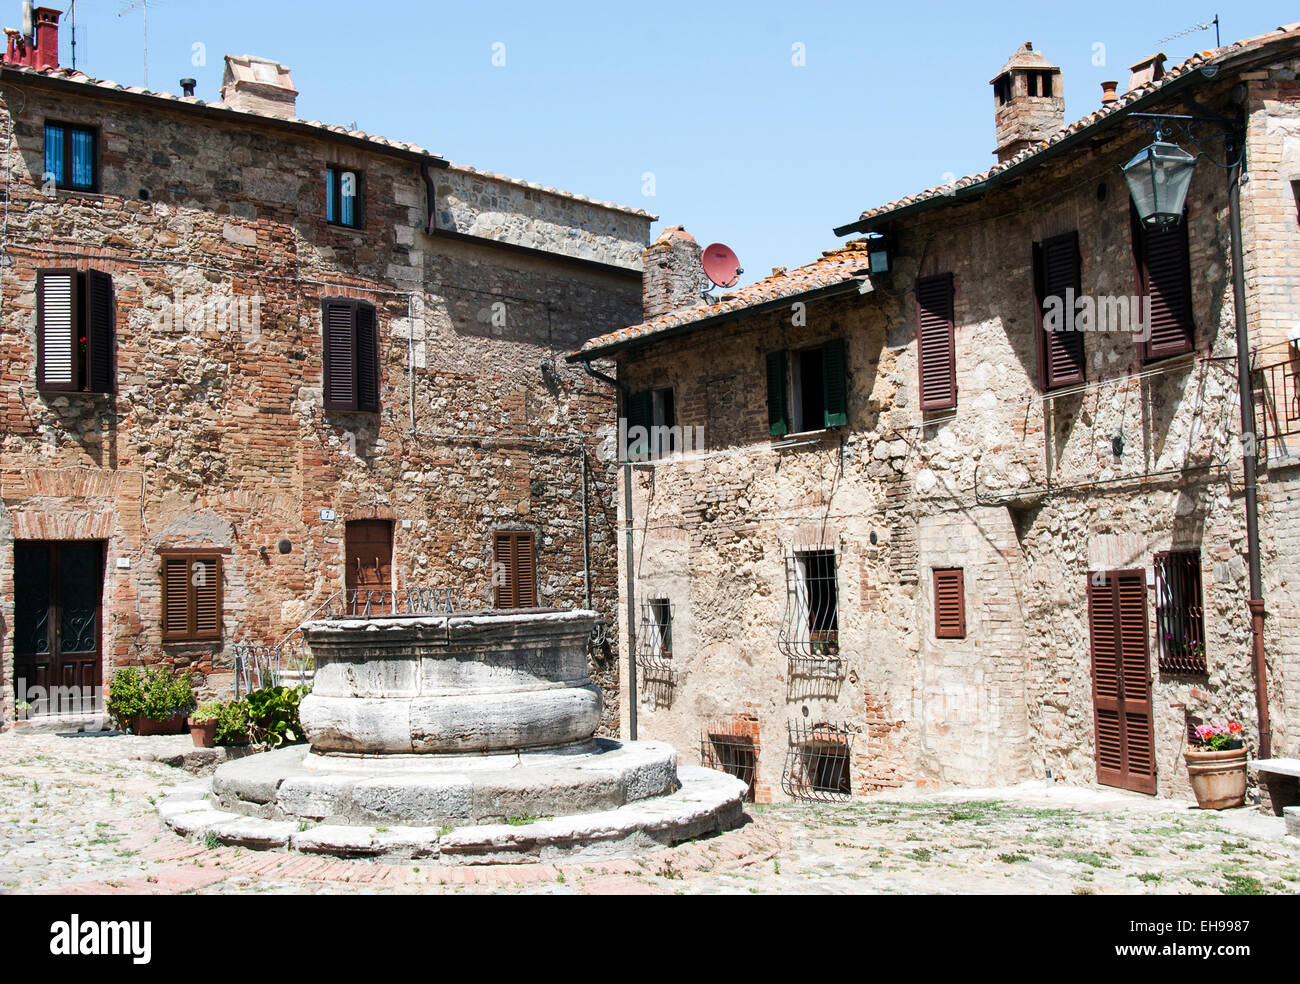 ancient square with water well in the italian old town Castiglione d' Orcia, Tuscany Italy Stock Photo